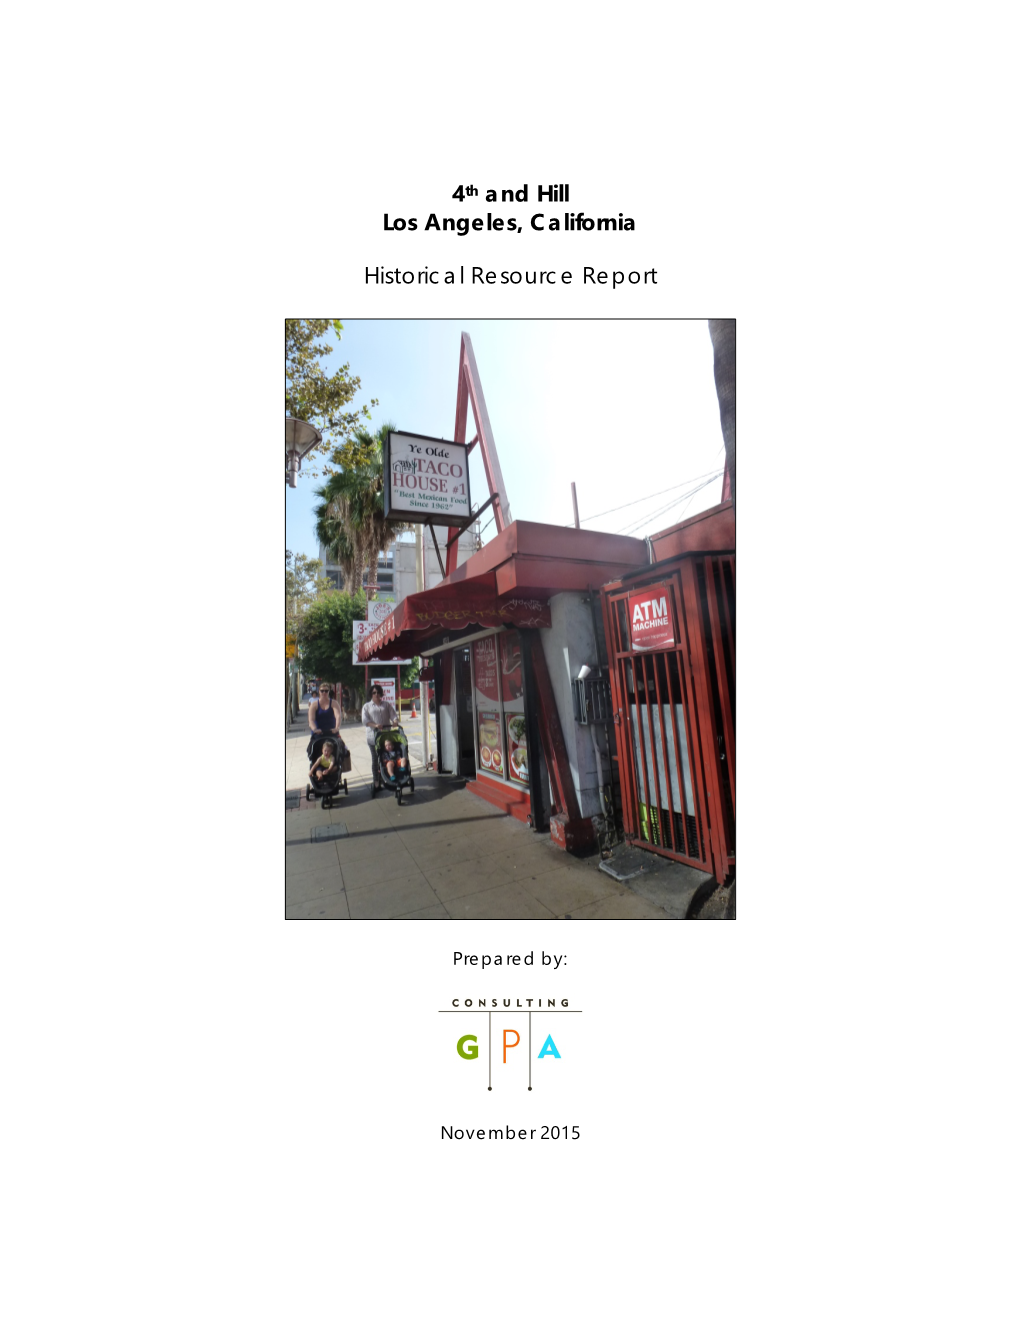 4Th and Hill Los Angeles, California Historical Resource Report